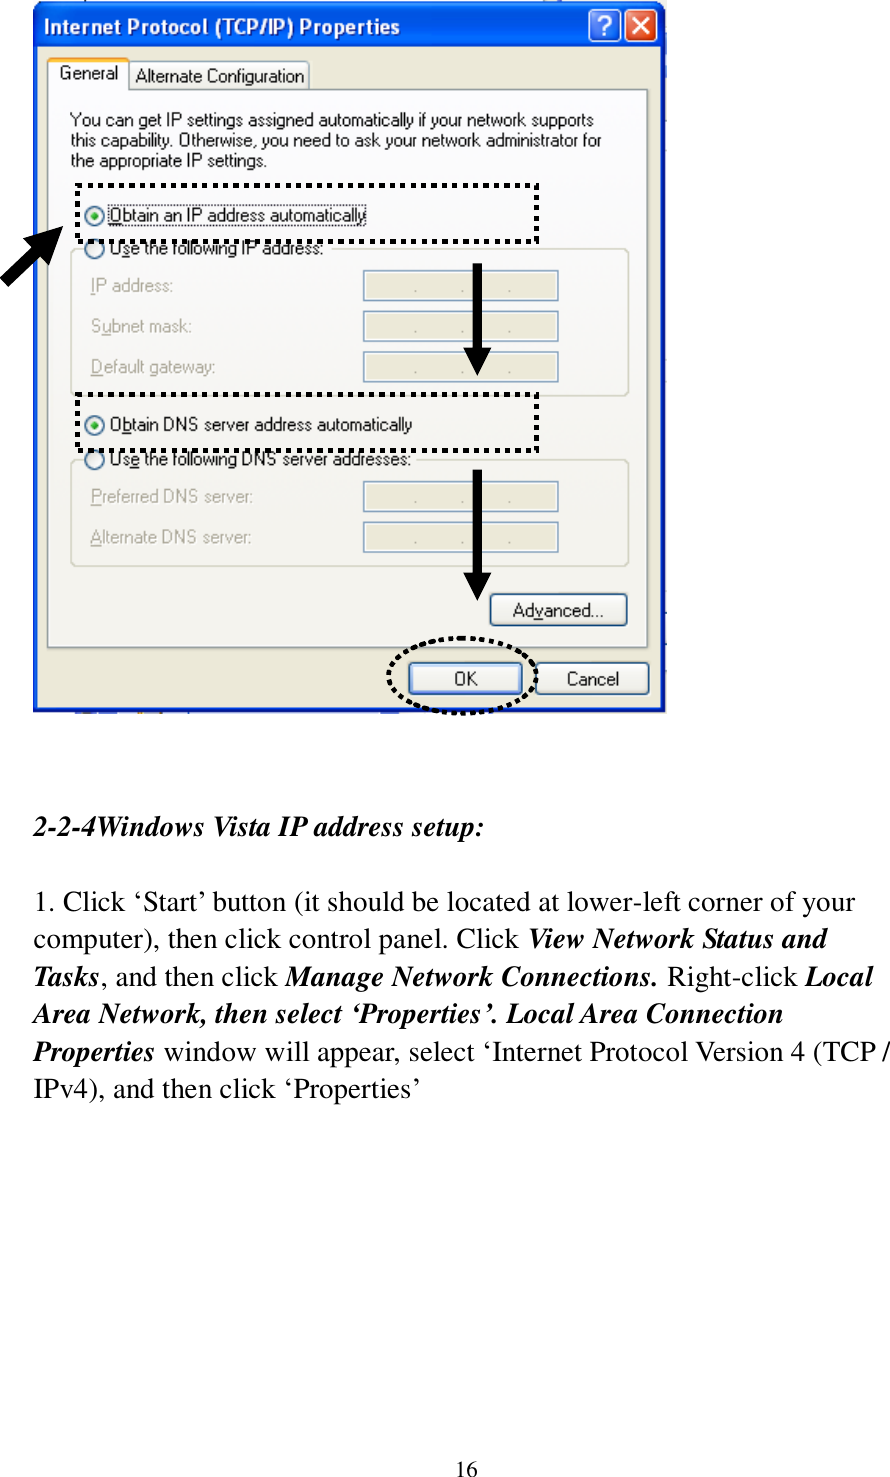 16    2-2-4Windows Vista IP address setup:  1. Click „Start‟ button (it should be located at lower-left corner of your computer), then click control panel. Click View Network Status and Tasks, and then click Manage Network Connections. Right-click Local Area Network, then select ‘Properties’. Local Area Connection Properties window will appear, select „Internet Protocol Version 4 (TCP / IPv4), and then click „Properties‟  